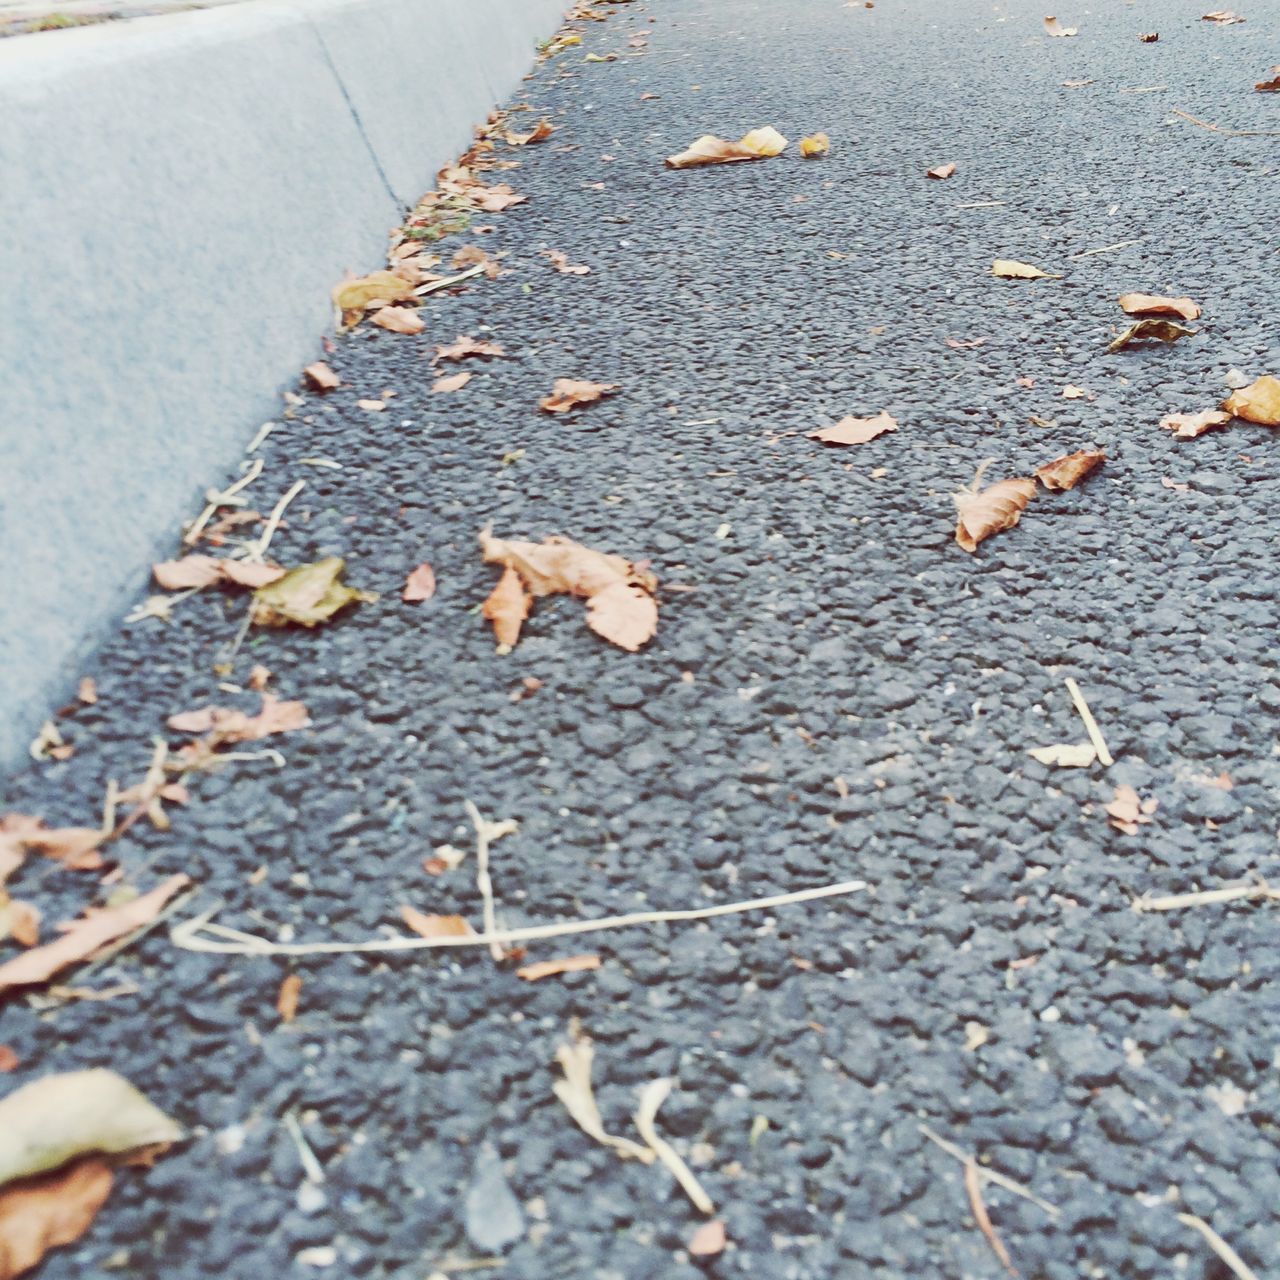 autumn, leaf, asphalt, street, change, high angle view, dry, fallen, season, leaves, road, transportation, road marking, falling, outdoors, day, sidewalk, surface level, ground, no people